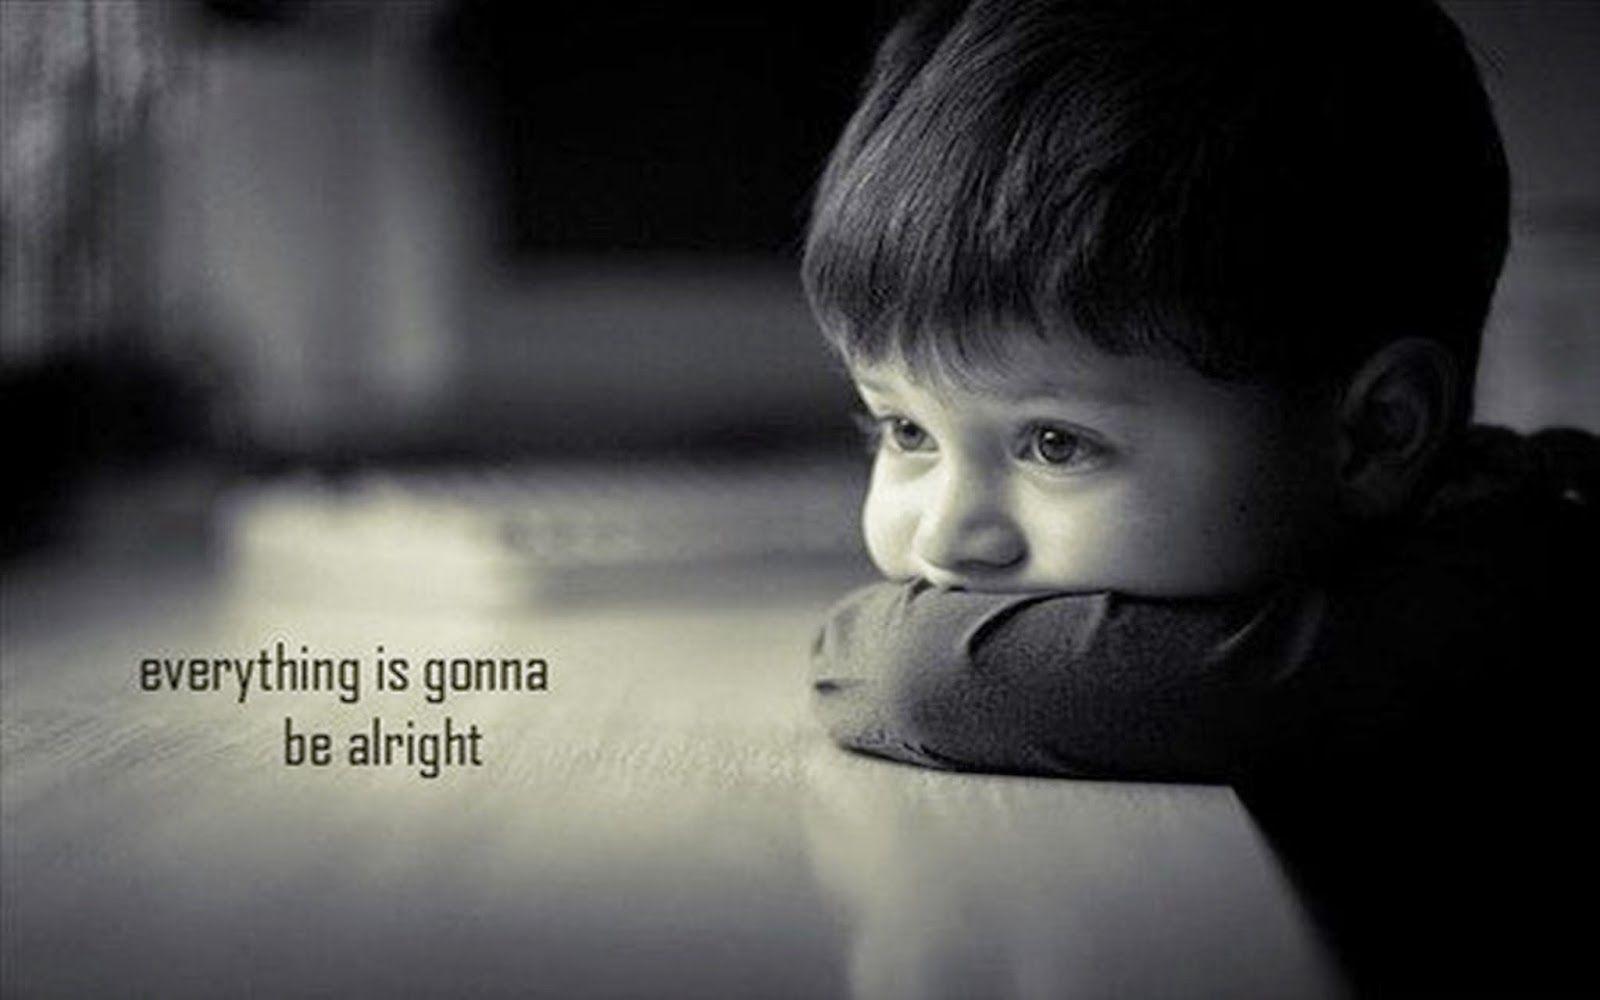 sad baby images with quotes